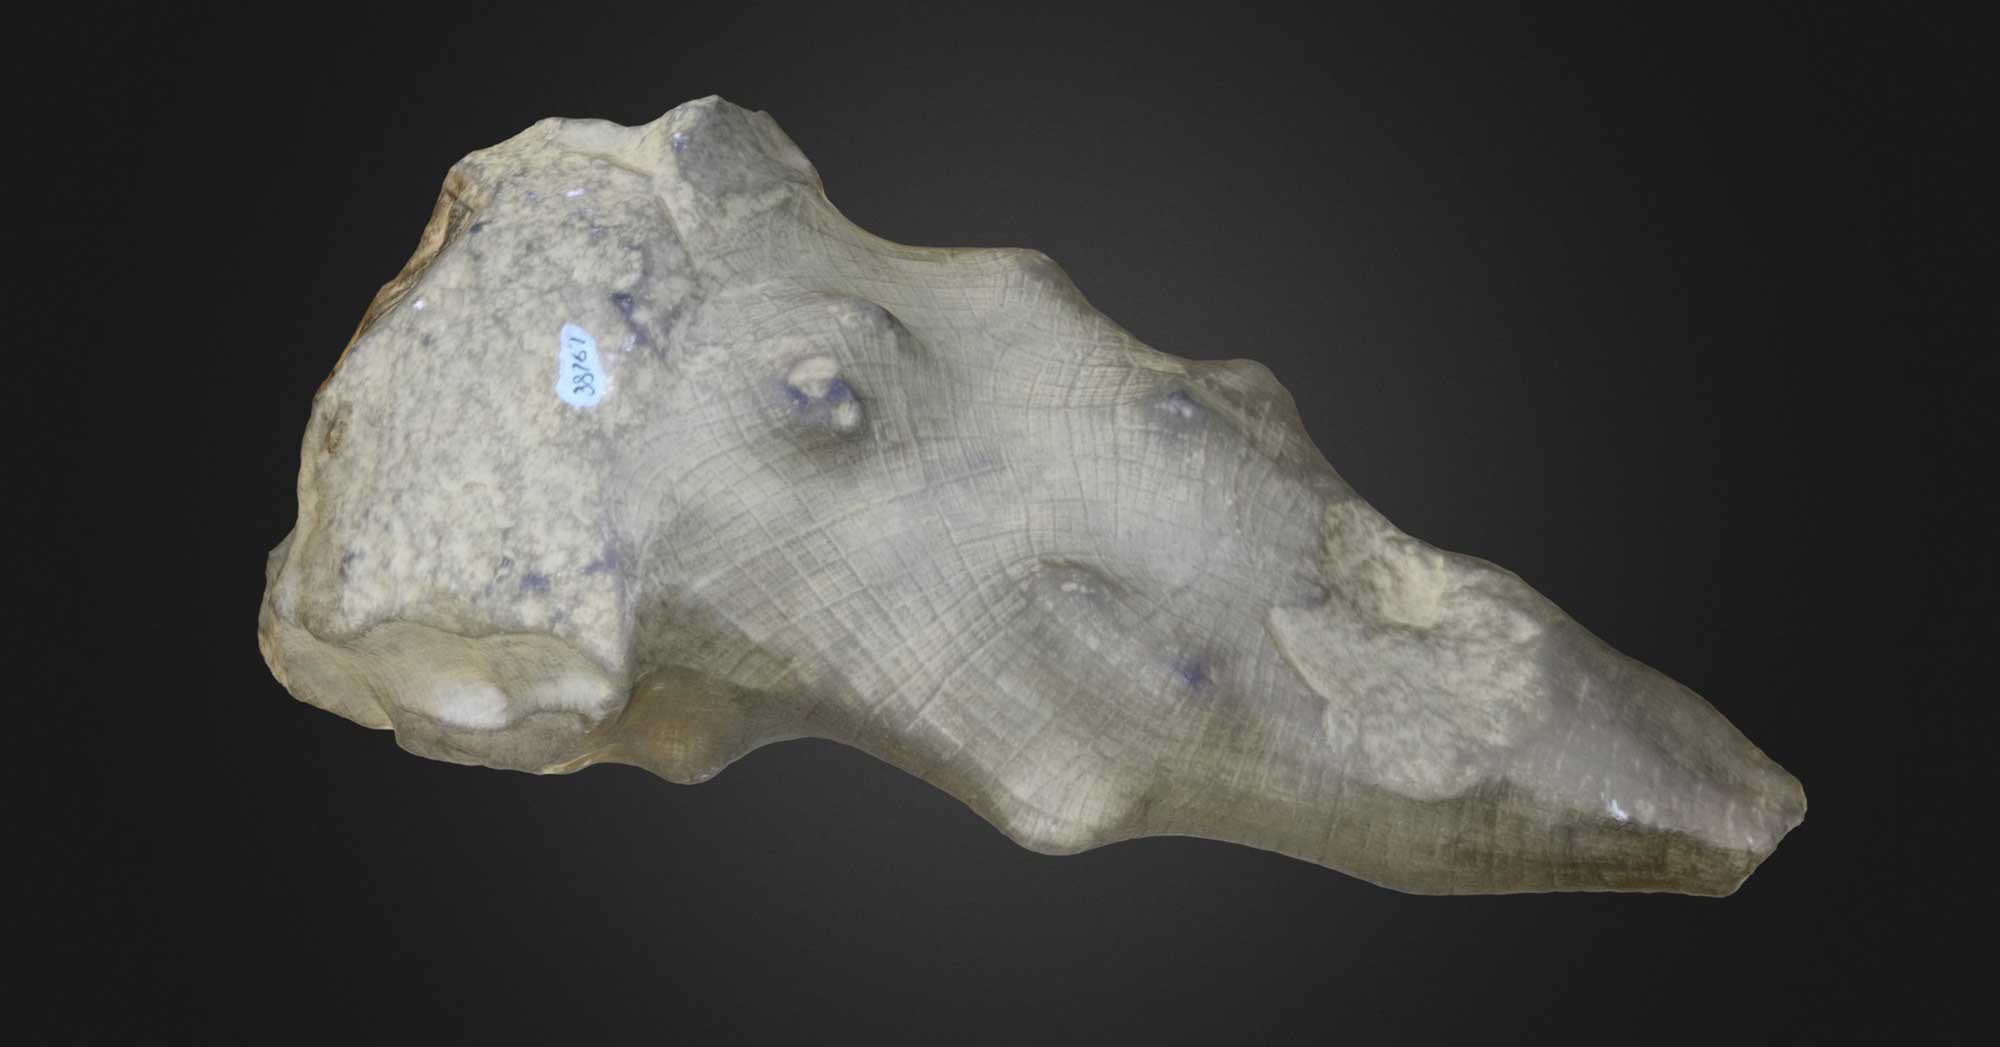 Image showing a 3D model of a Devonian glass sponge fossil from New York.